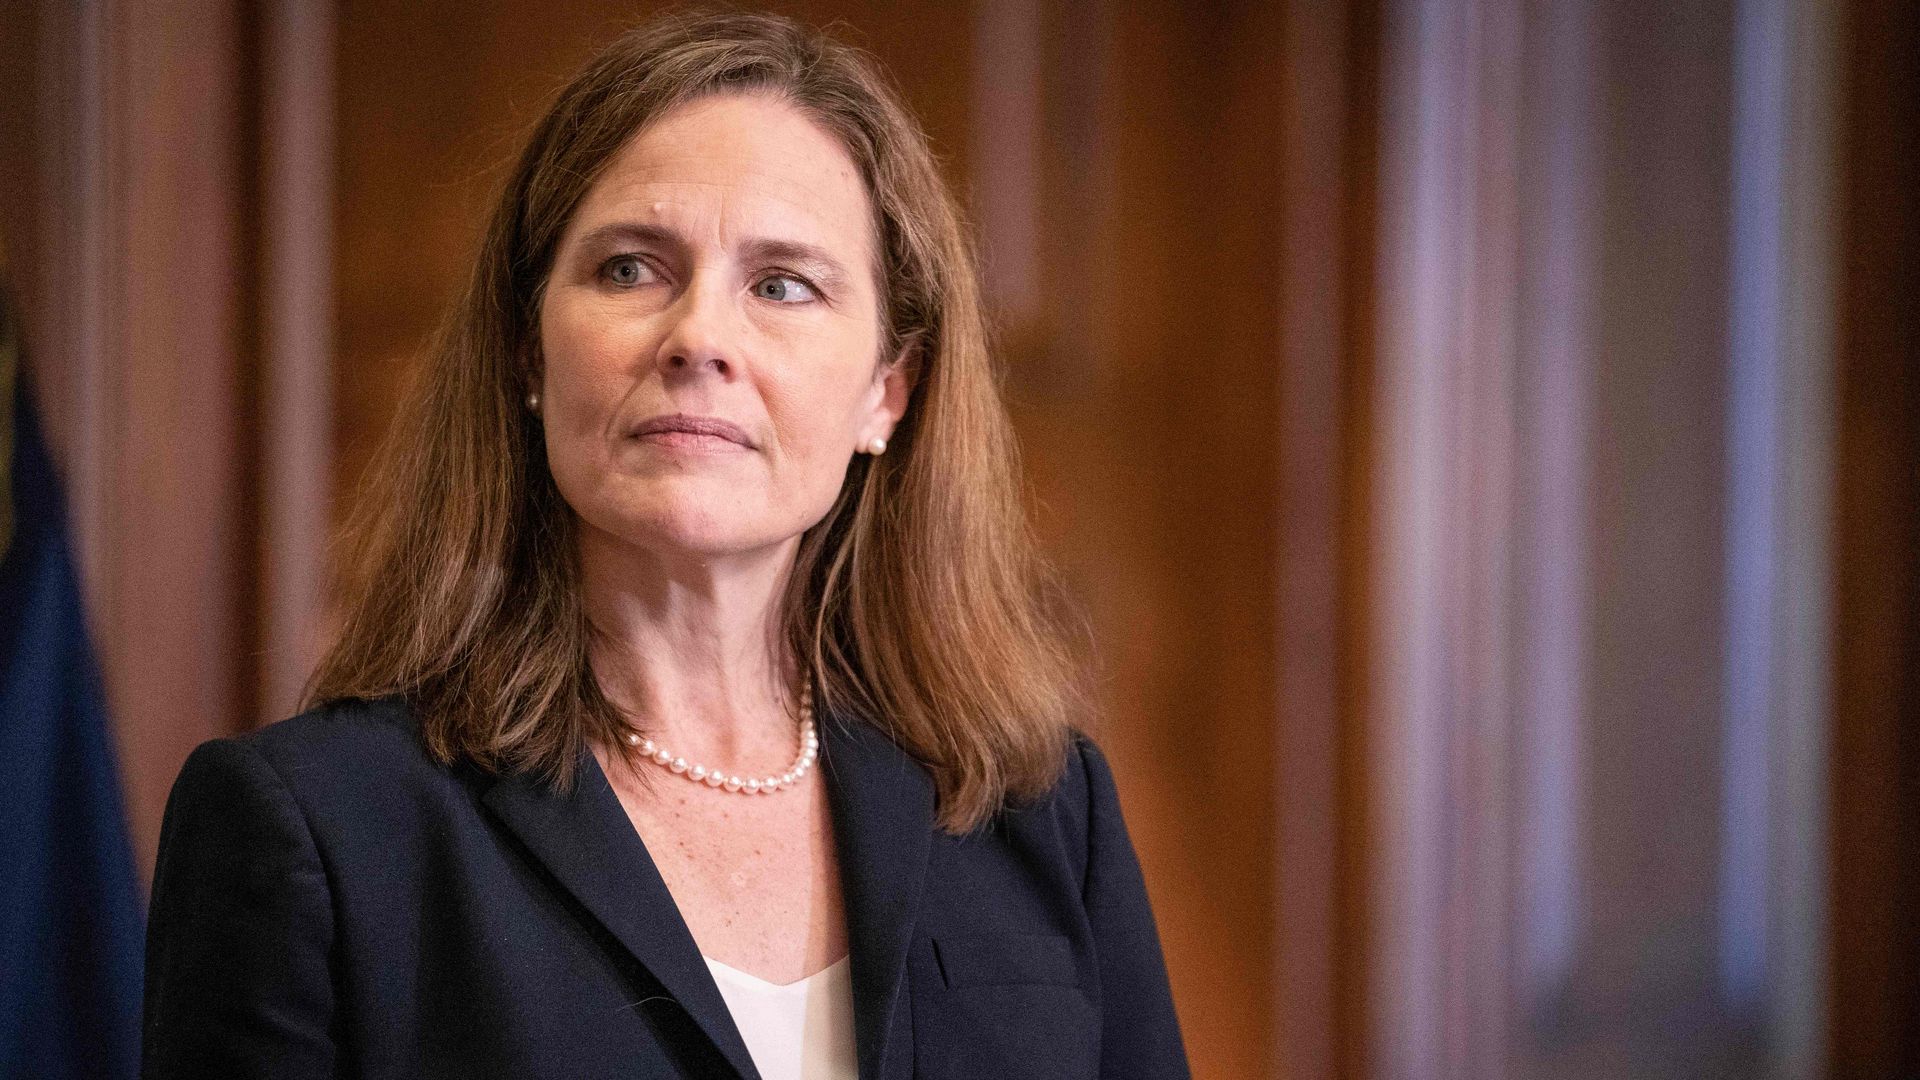 Amy Coney Barrett looks to her right while wearing a black blazer and pearls